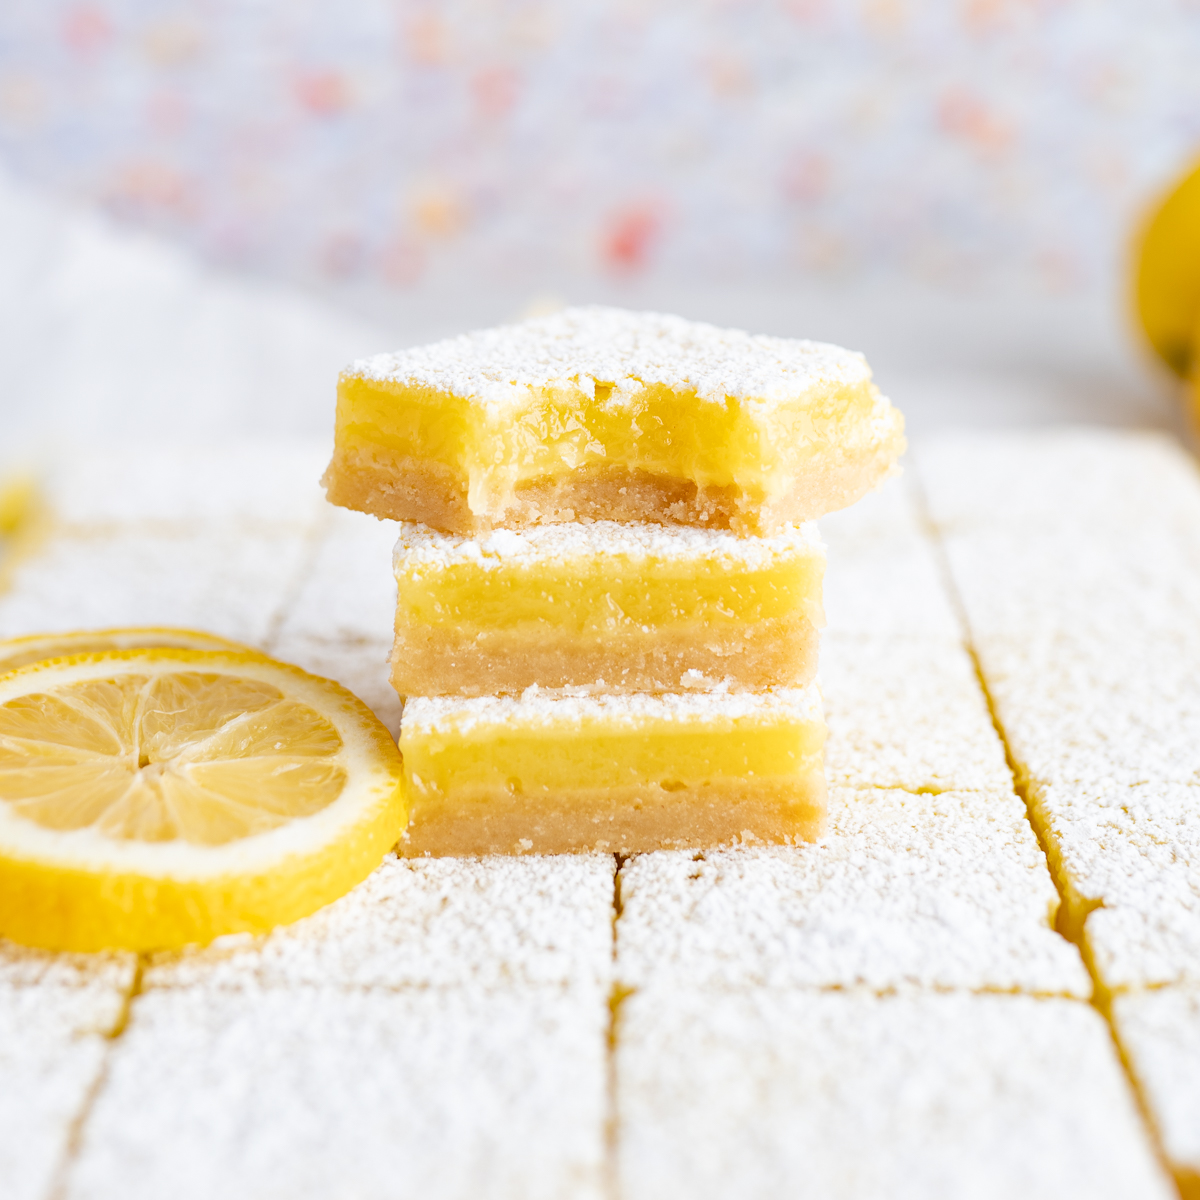 3 lemon bars stacked on top of each other next to a lemon slice.